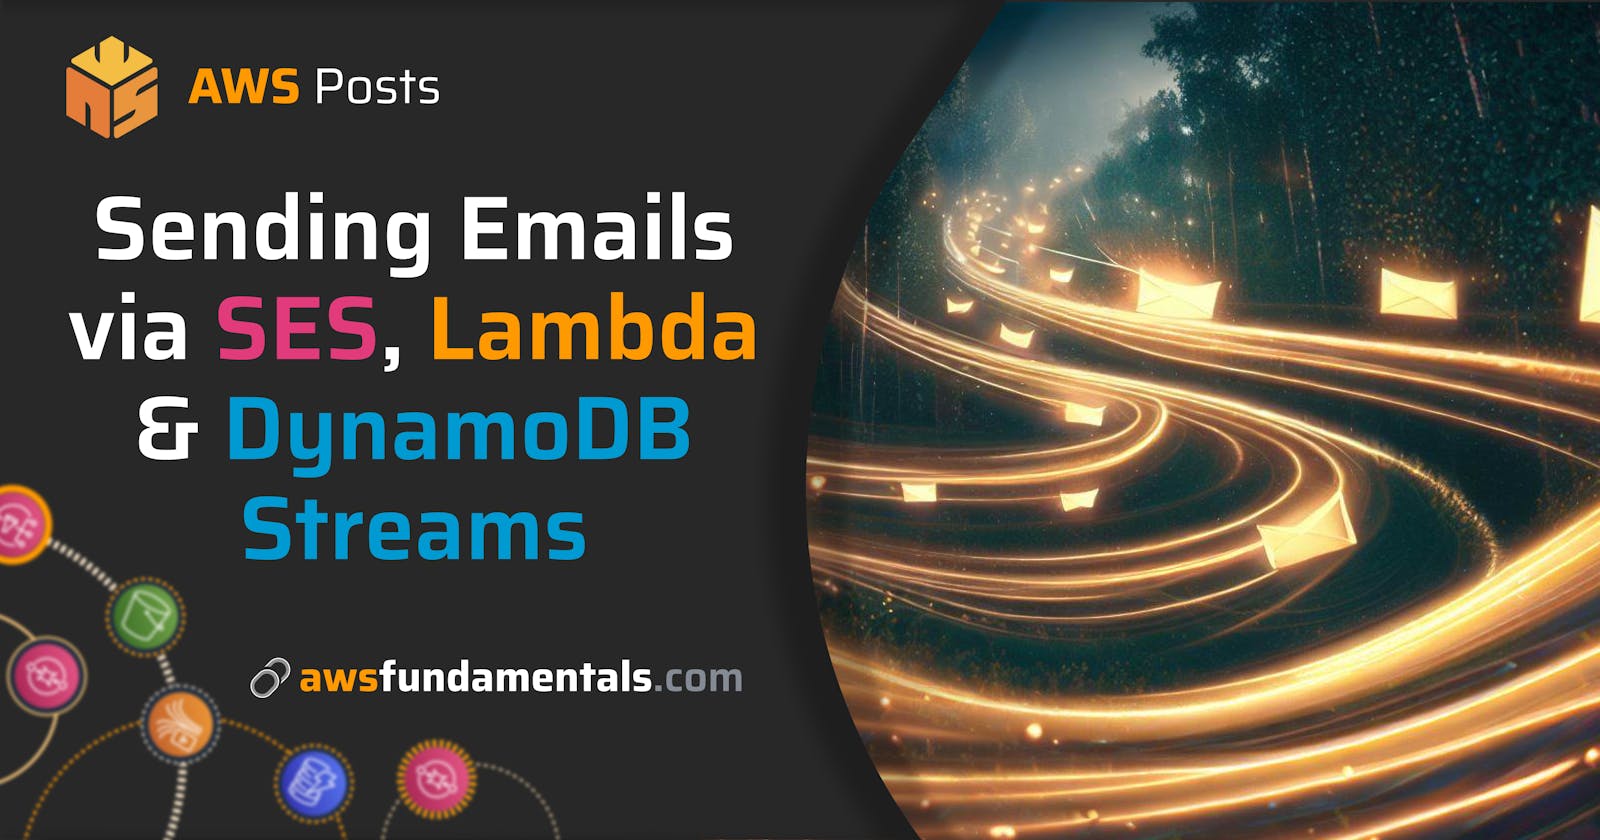 Learn How to Automate Welcome Emails with Amazon SES, Lambda and DynamoDB Streams